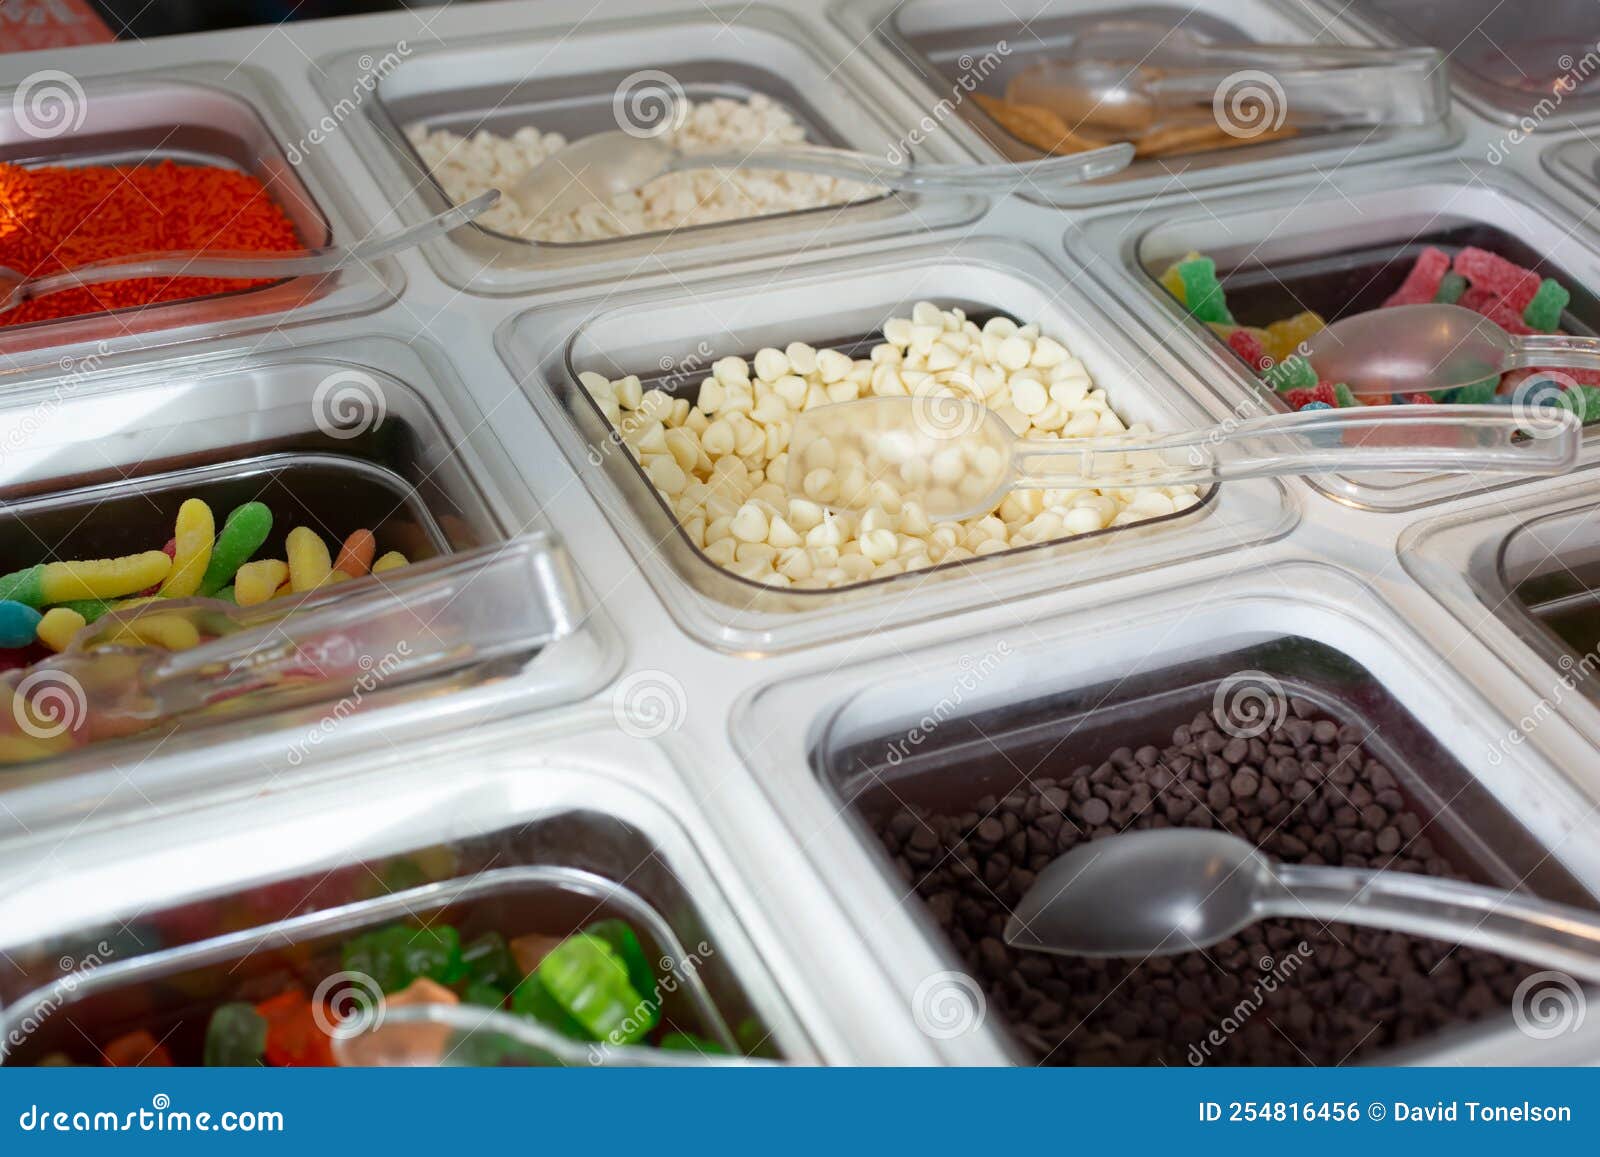 https://thumbs.dreamstime.com/z/view-several-containers-full-toppings-frozen-yogurt-ice-cream-shop-setting-table-toppings-frozen-yogurt-254816456.jpg